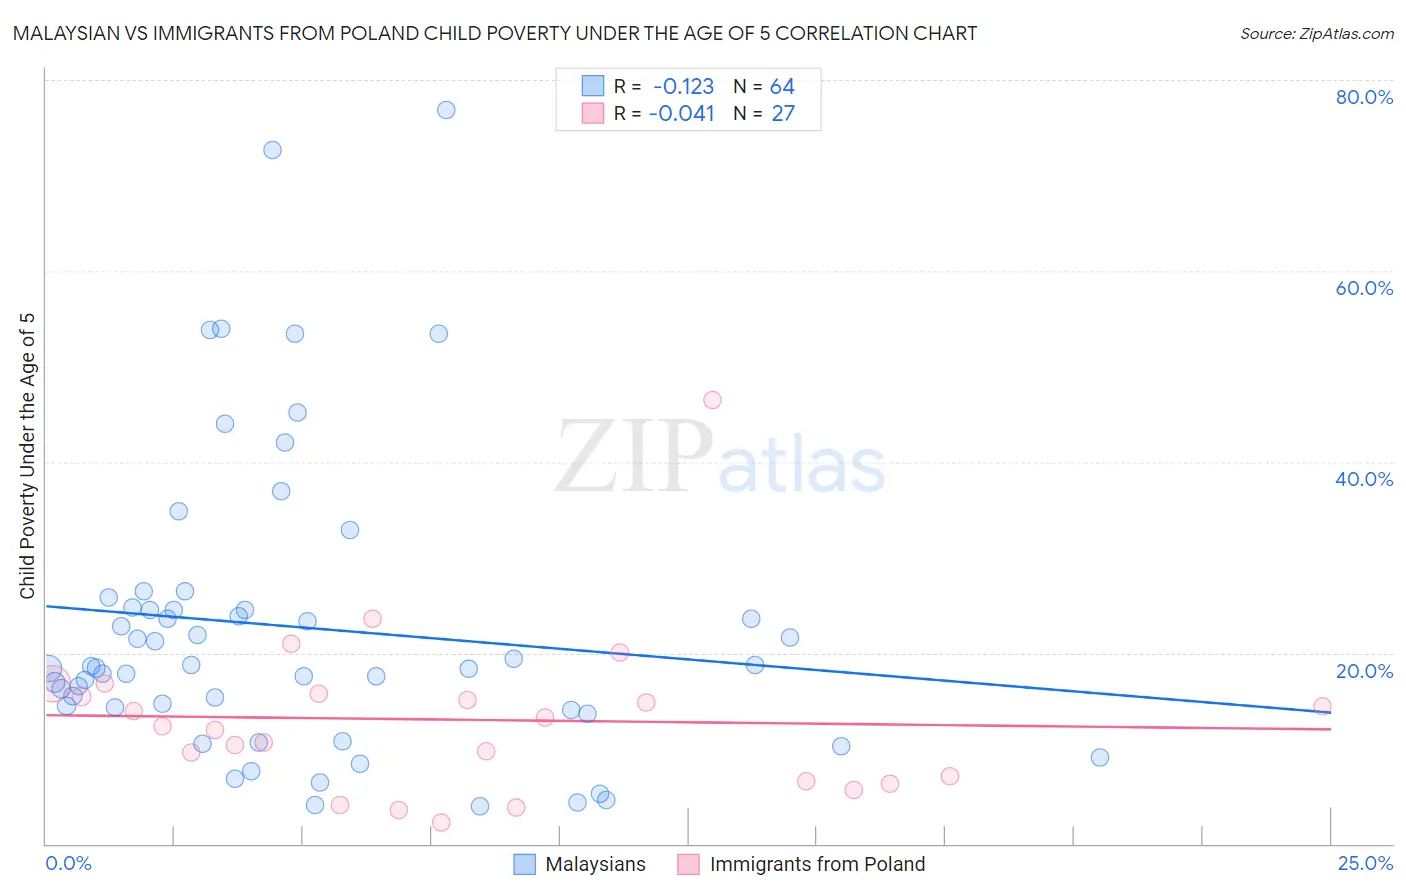 Malaysian vs Immigrants from Poland Child Poverty Under the Age of 5